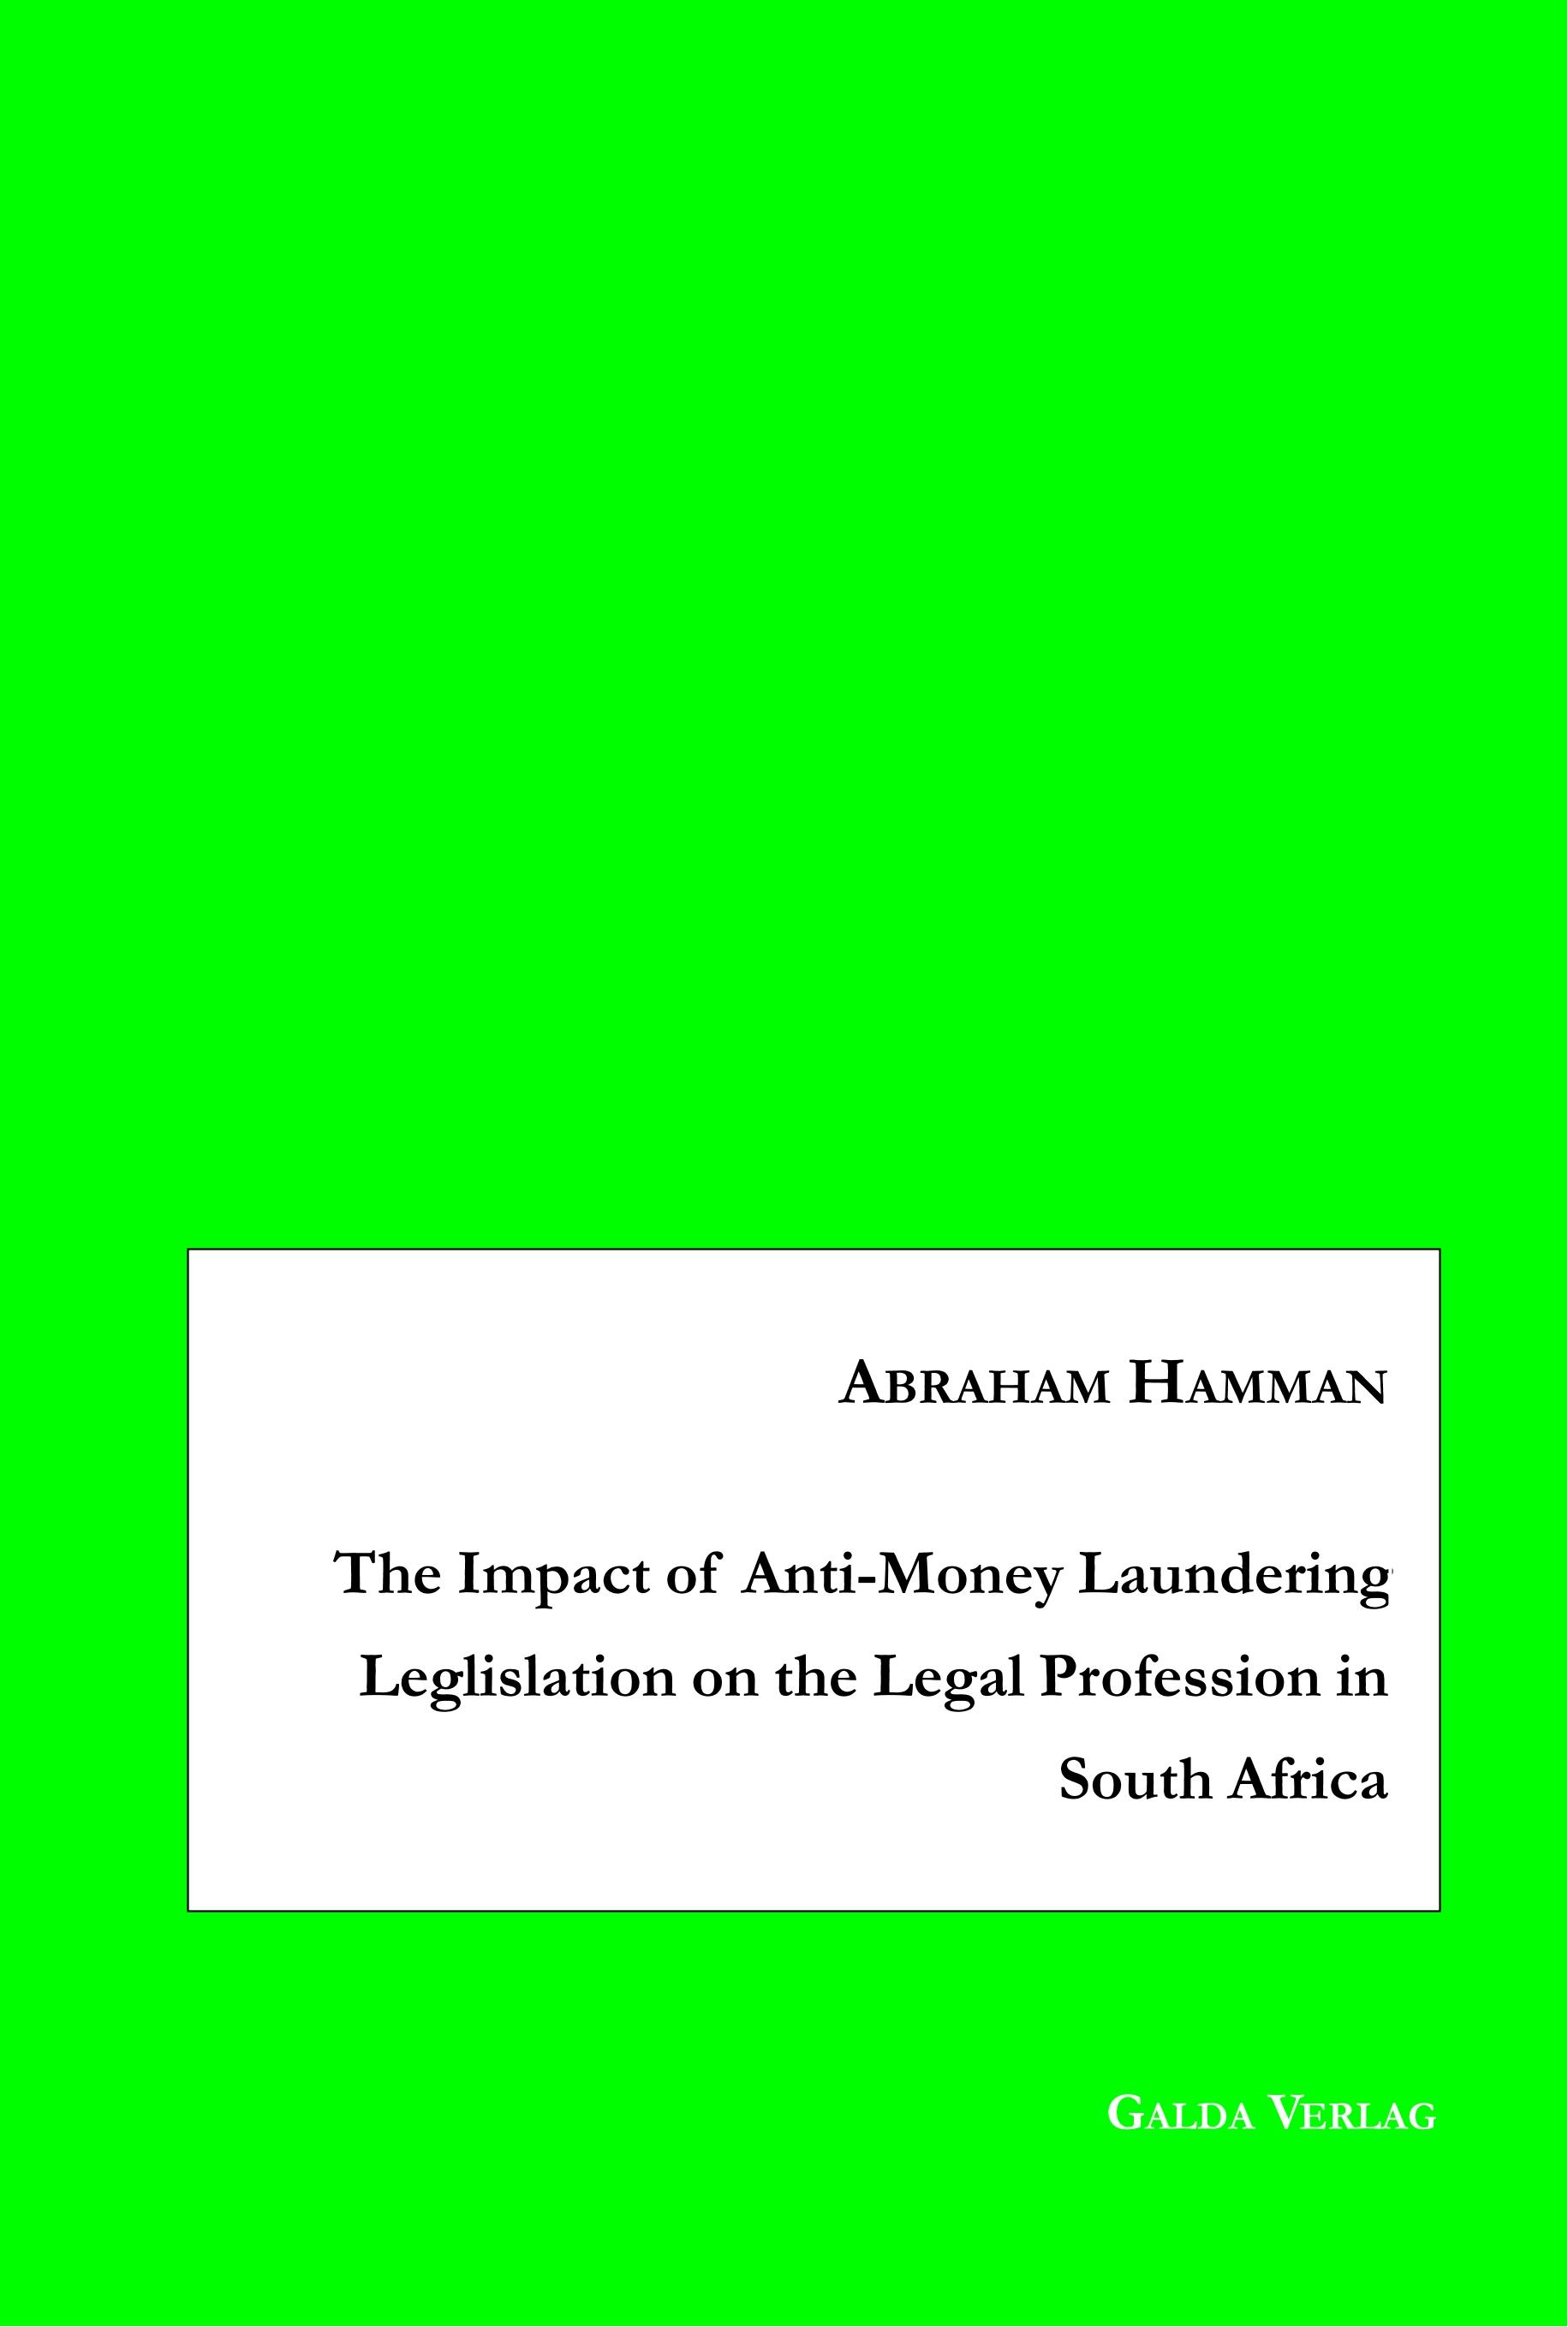 The Impact of Anti-Money Laundering Leglislation on the Legal Profession in South Africa - Abraham Hamman